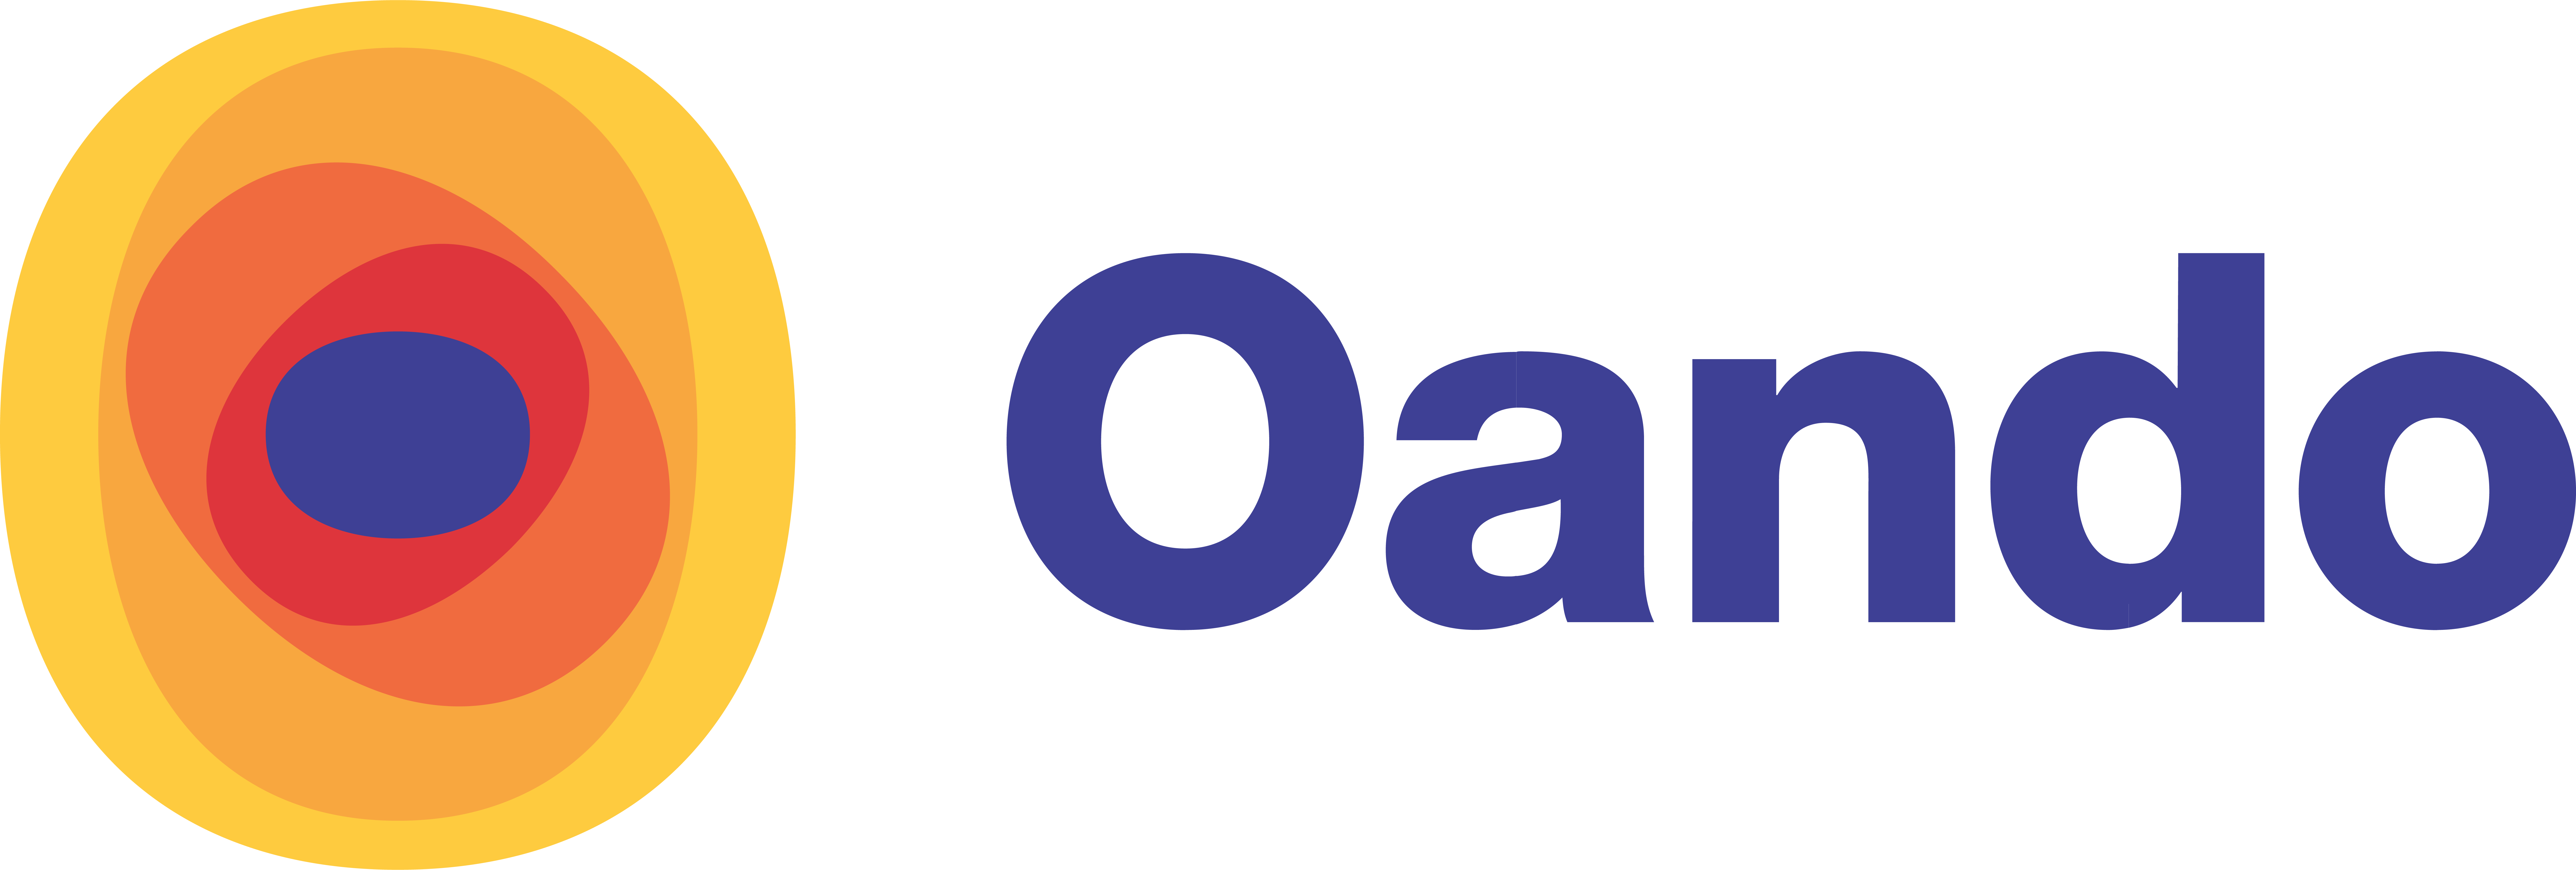 LAMATA & OANDO SIGN MoU TO LAUNCH ELECTRIC MASS TRANSIT BUSES JUNE 6, 2022